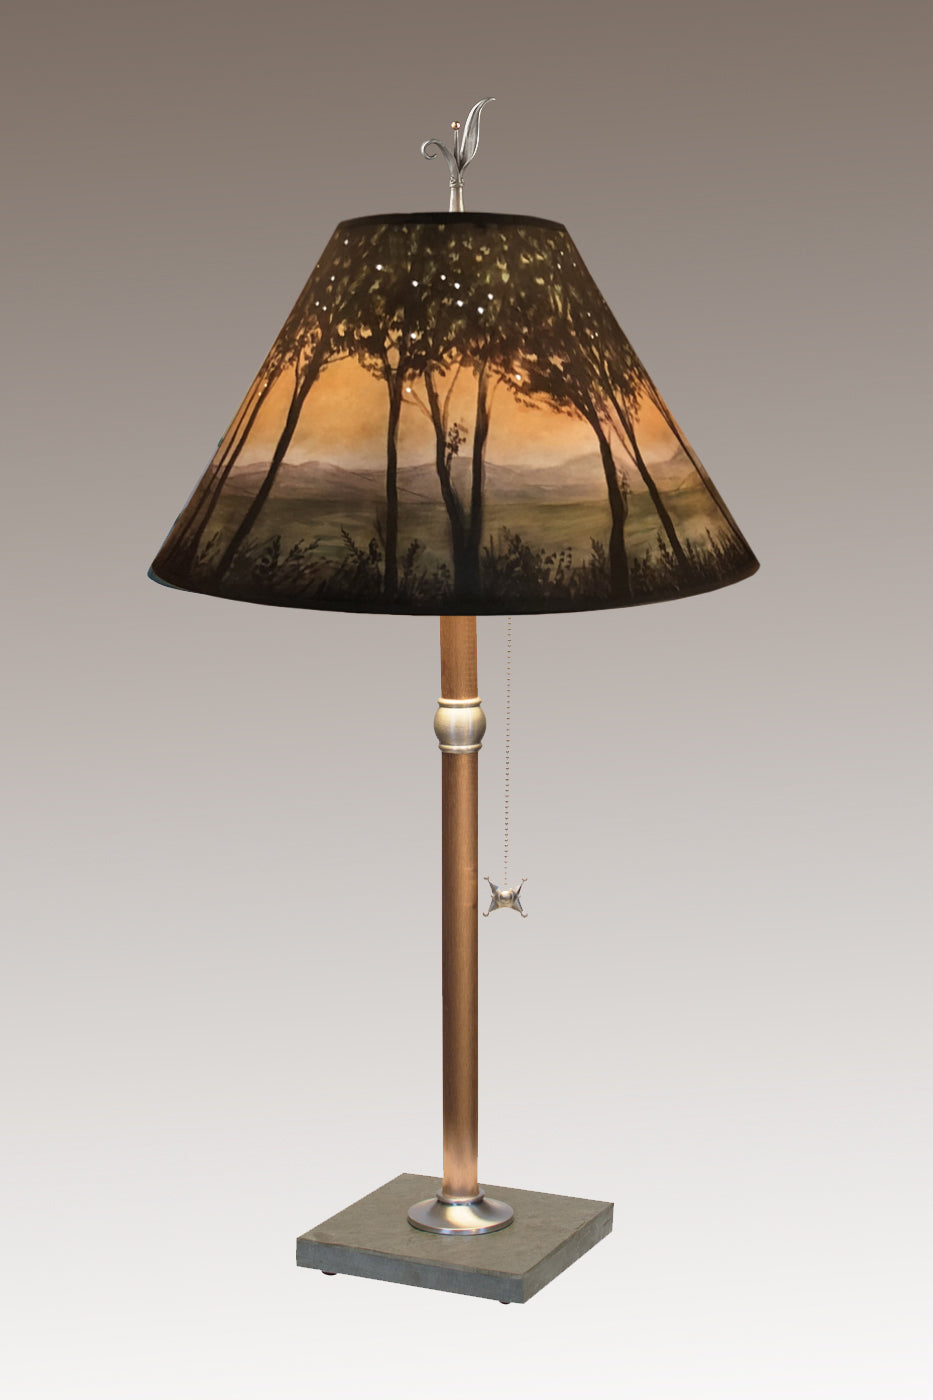 Janna Ugone & Co Table Lamps Copper Table Lamp with Medium Conical Shade in Dawn